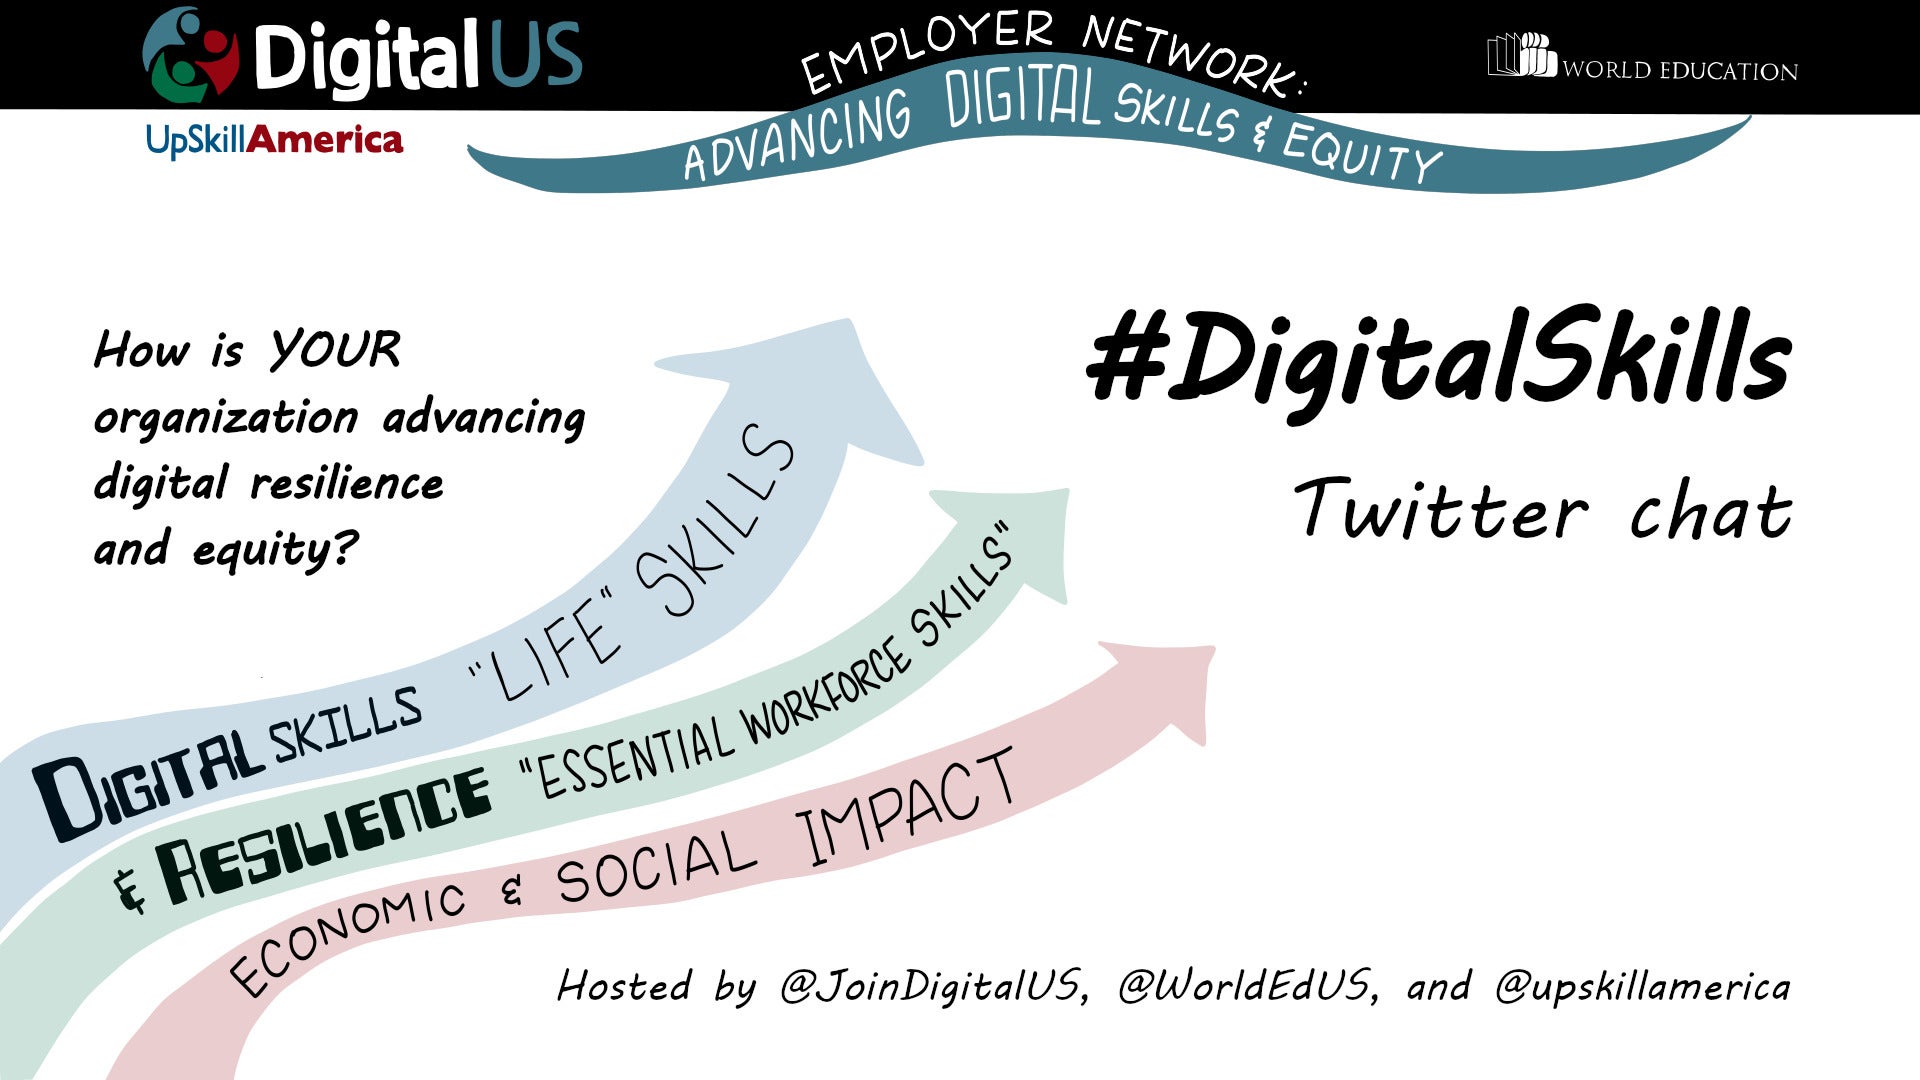 Promotional graphic for a #DigitalSkills Twitter chat hosted by @JoinDigitalUS, @WorldEdUS and @upskillamerica.